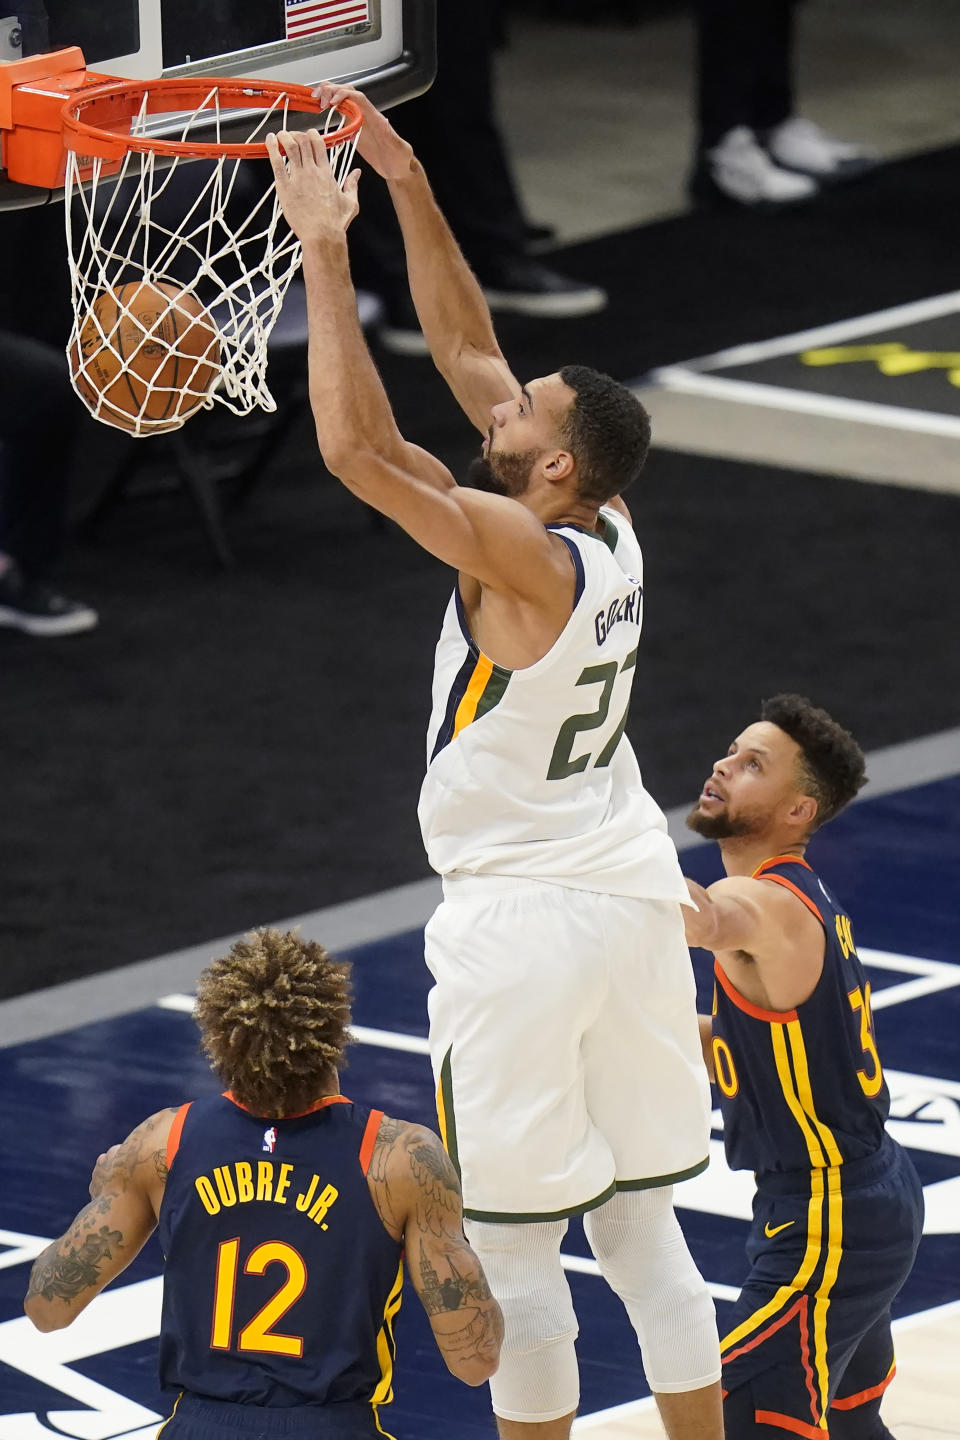 Utah Jazz center Rudy Gobert (27) dunks as Golden State Warriors' Kelly Oubre Jr. (12) and Stephen Curry, right, defend during the first half of an NBA basketball game Saturday, Jan. 23, 2021, in Salt Lake City. (AP Photo/Rick Bowmer)